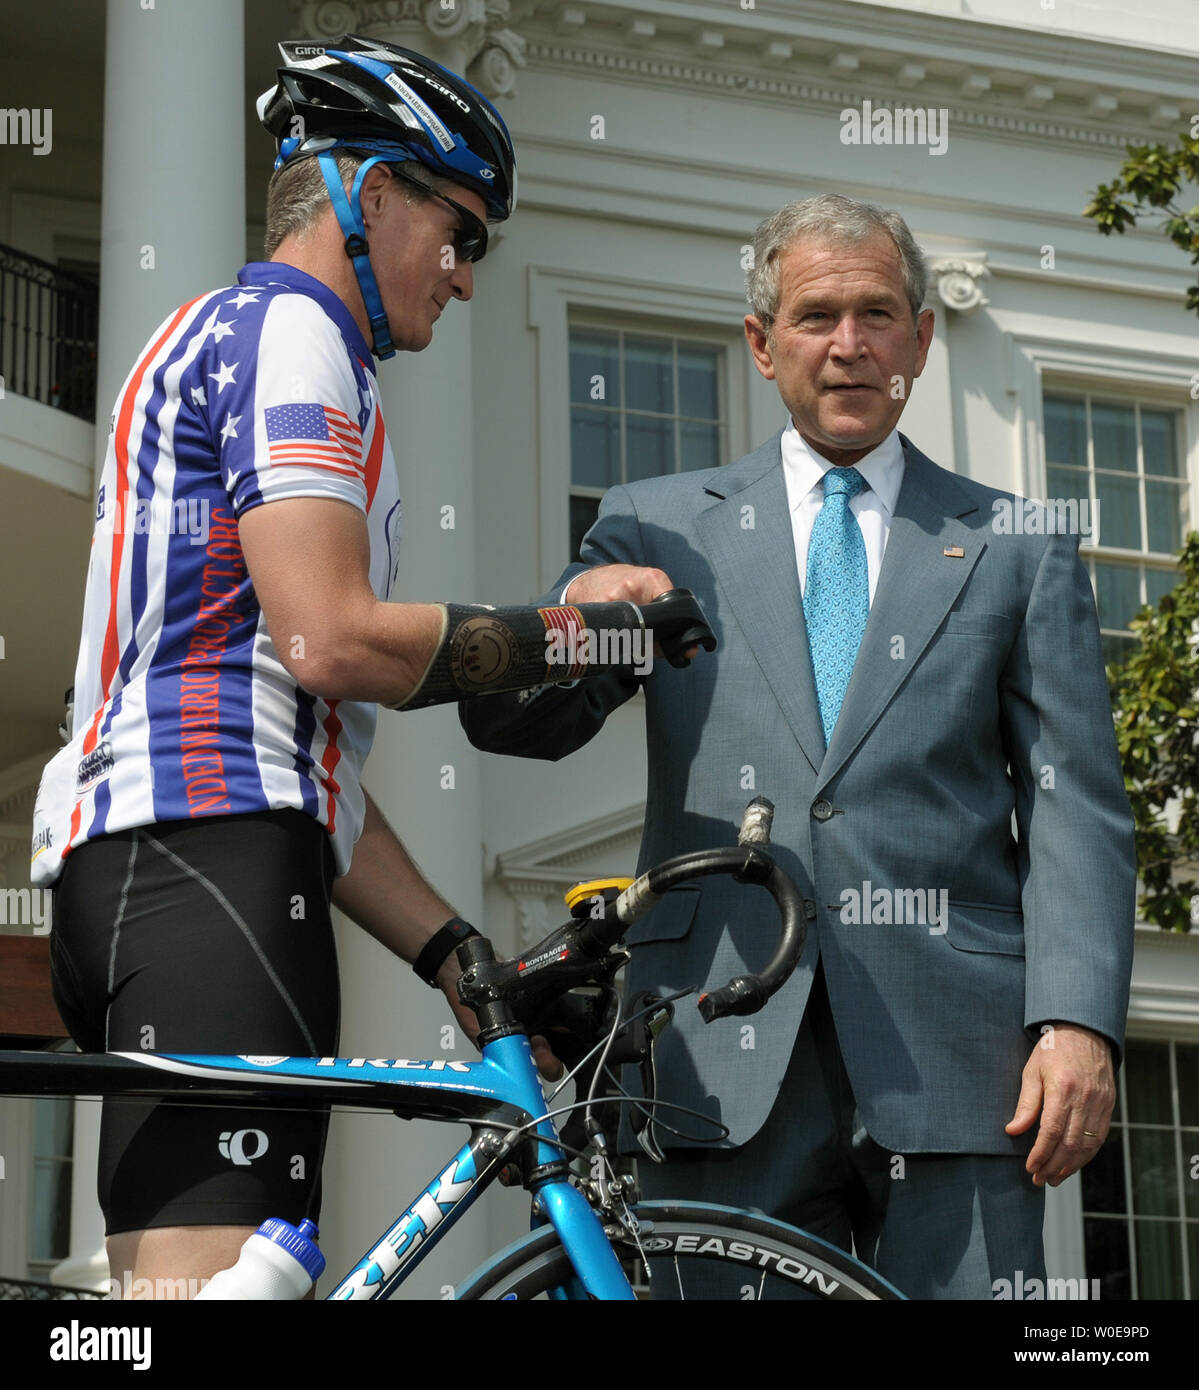 U.S. President George W. Bush sticks his finger in the prosthesis of an unidentified participant as he helps kick off the Wounded Warrior Ride on the South Lawn of the White House in Washington on April 24, 2008. Dozens of veterans wounded in Iraq and Afghanistan are participating in the three day bicycle ride that will end in Annapolis, Maryland. The prosthesis is used to grip the handle bar of the bike.   (UPI Photo/Roger L. Wollenberg) Stock Photo